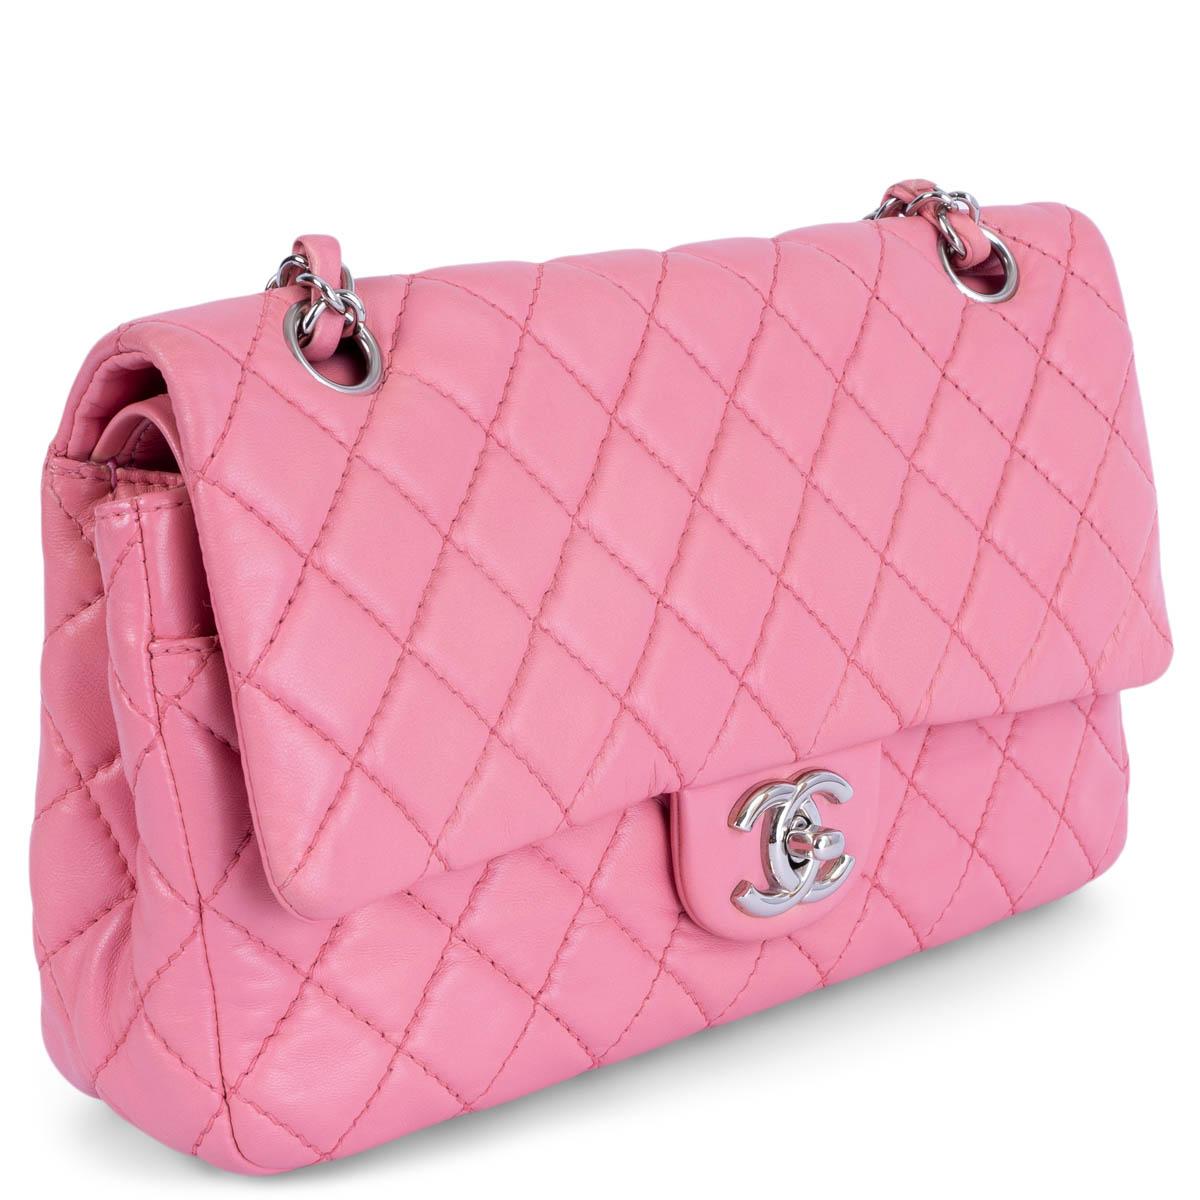 100% authentic Chanel Soft Classic Medium Timeless Double Flap Bag in pink lambskin featuring silver-tone hardware. Open pocket on the back. Closes with classic CC-turn-lock on the front. Zipper pocket inside the flap. Outside pocket on the front